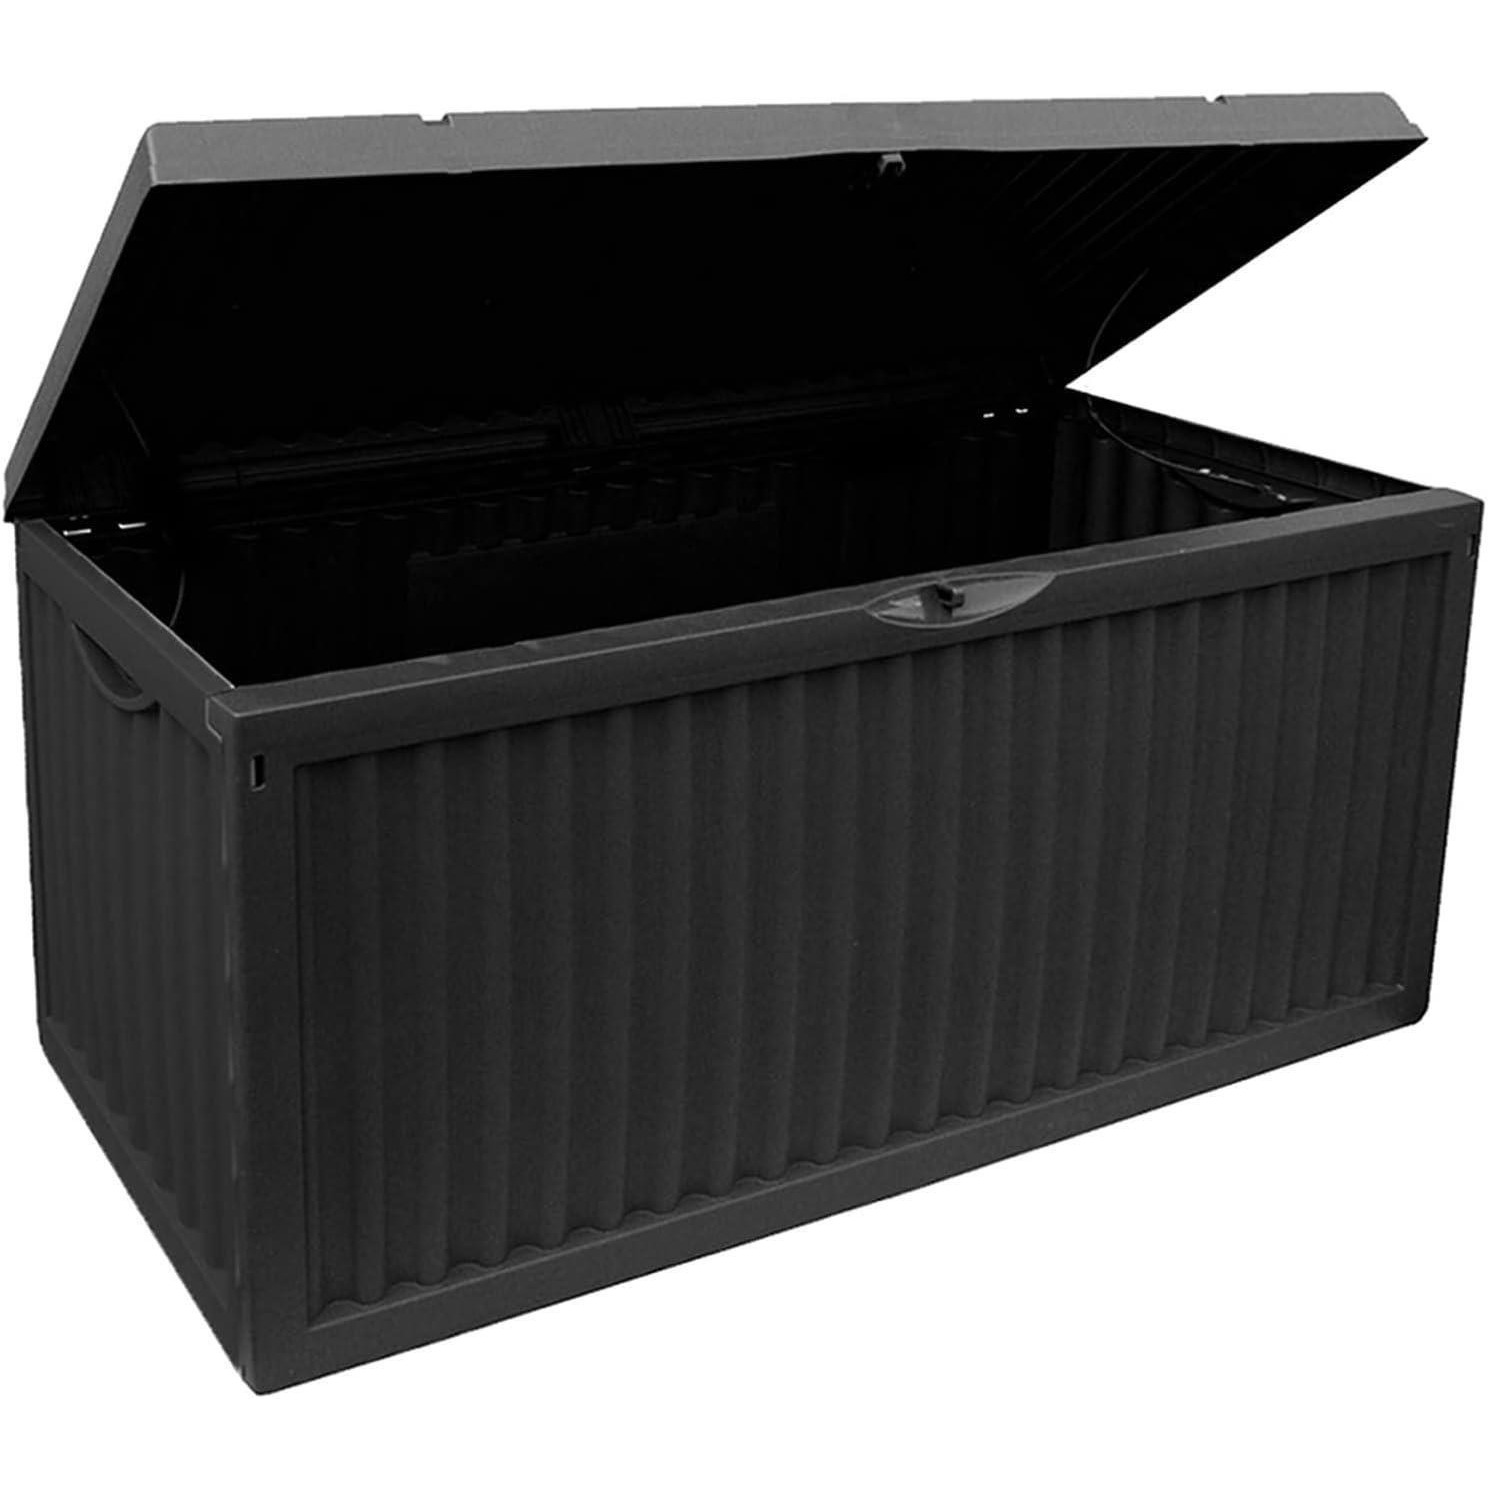 336L Large Outdoor Garden Plastic Storage Box Container - image 1